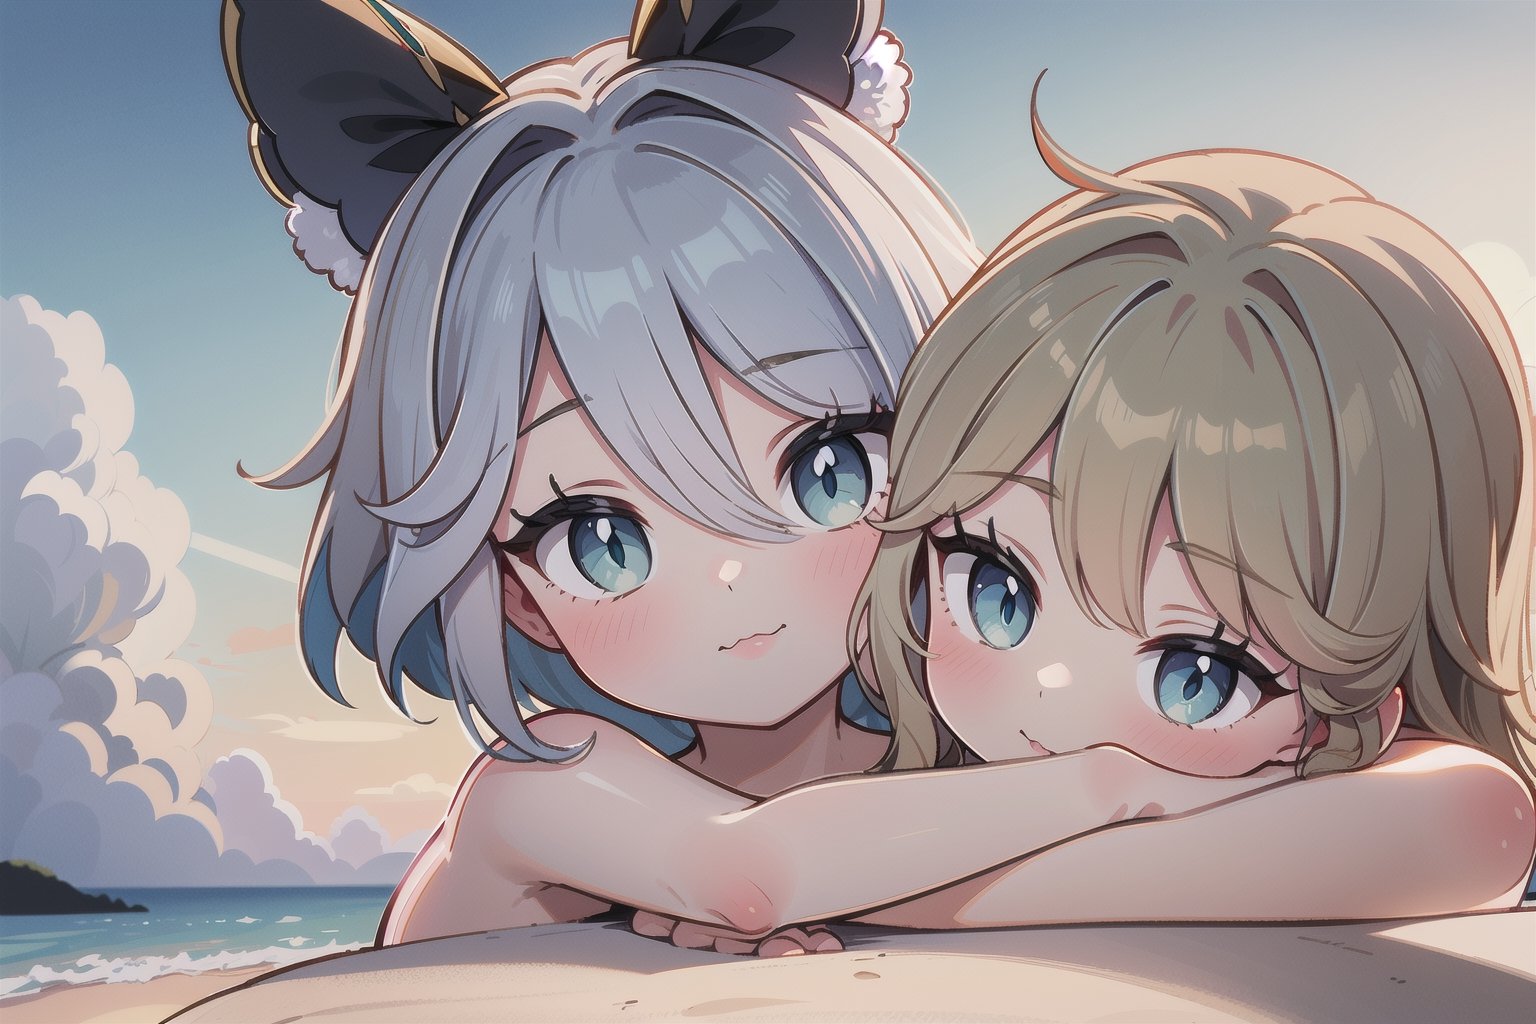 Furina and Kiraragenshin, two sisters embracing on a sun-kissed beach, their skin glowing with a warm sandy sheen. Soft focus captures tender intimacy as golden light casts a warm glow on the pair. Majestic beach stretches behind them, waves gently lapping at shore. Brilliant blue sky above with wispy clouds drifting lazily, Furina's hair blowing softly in gentle breeze.